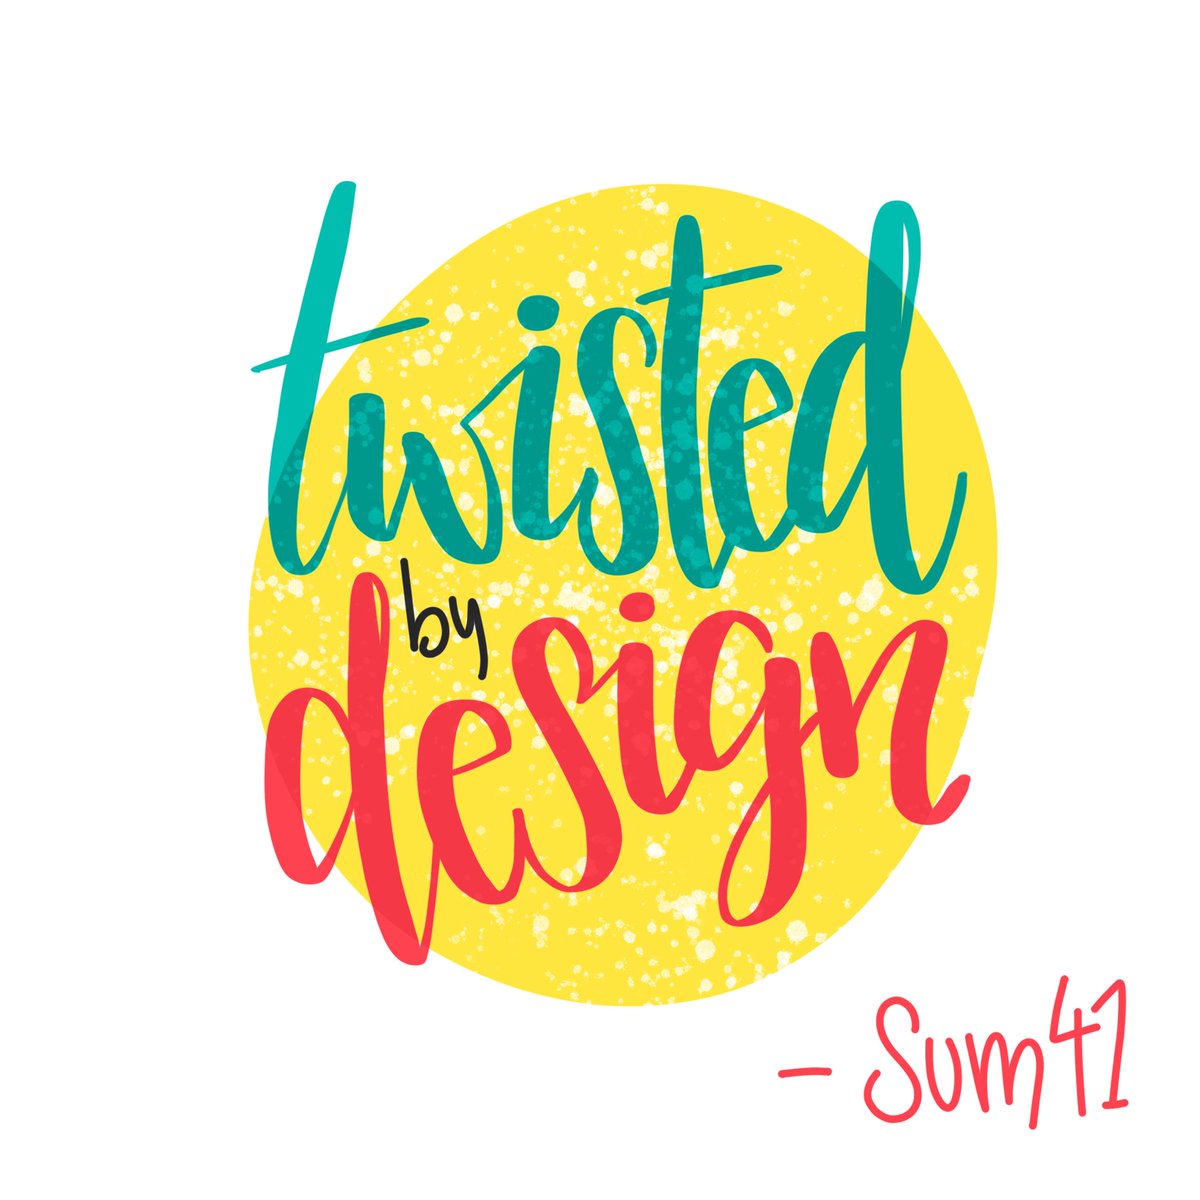 Twisted by design - sum 41